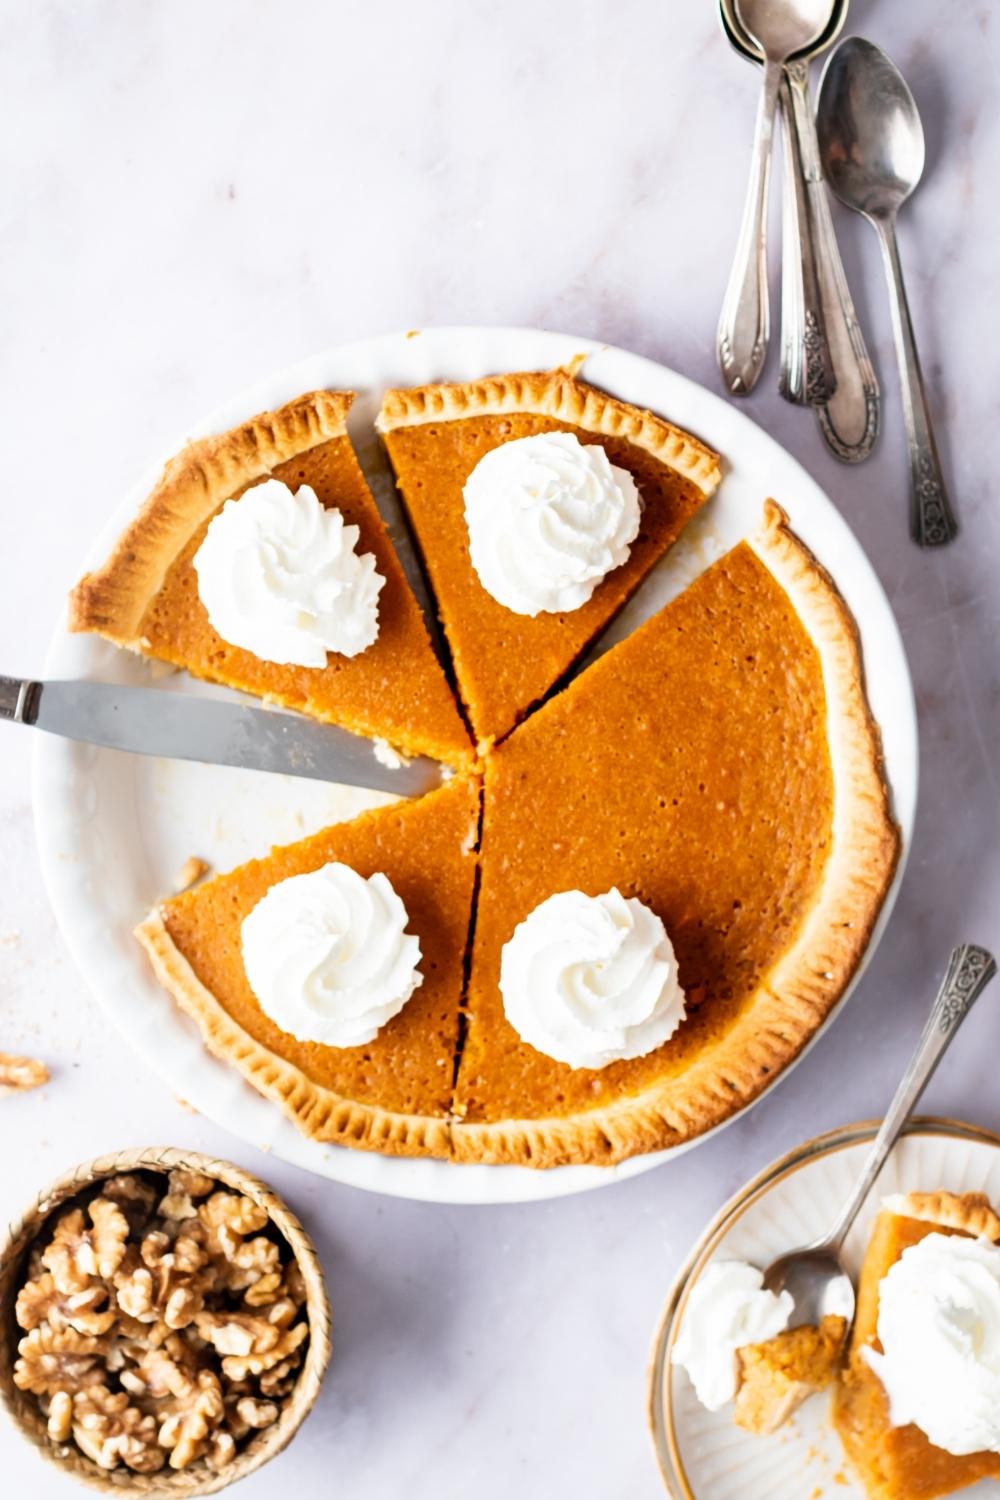 A sweet potato pie that has three slices cut and the rest of it uncut on a plate.